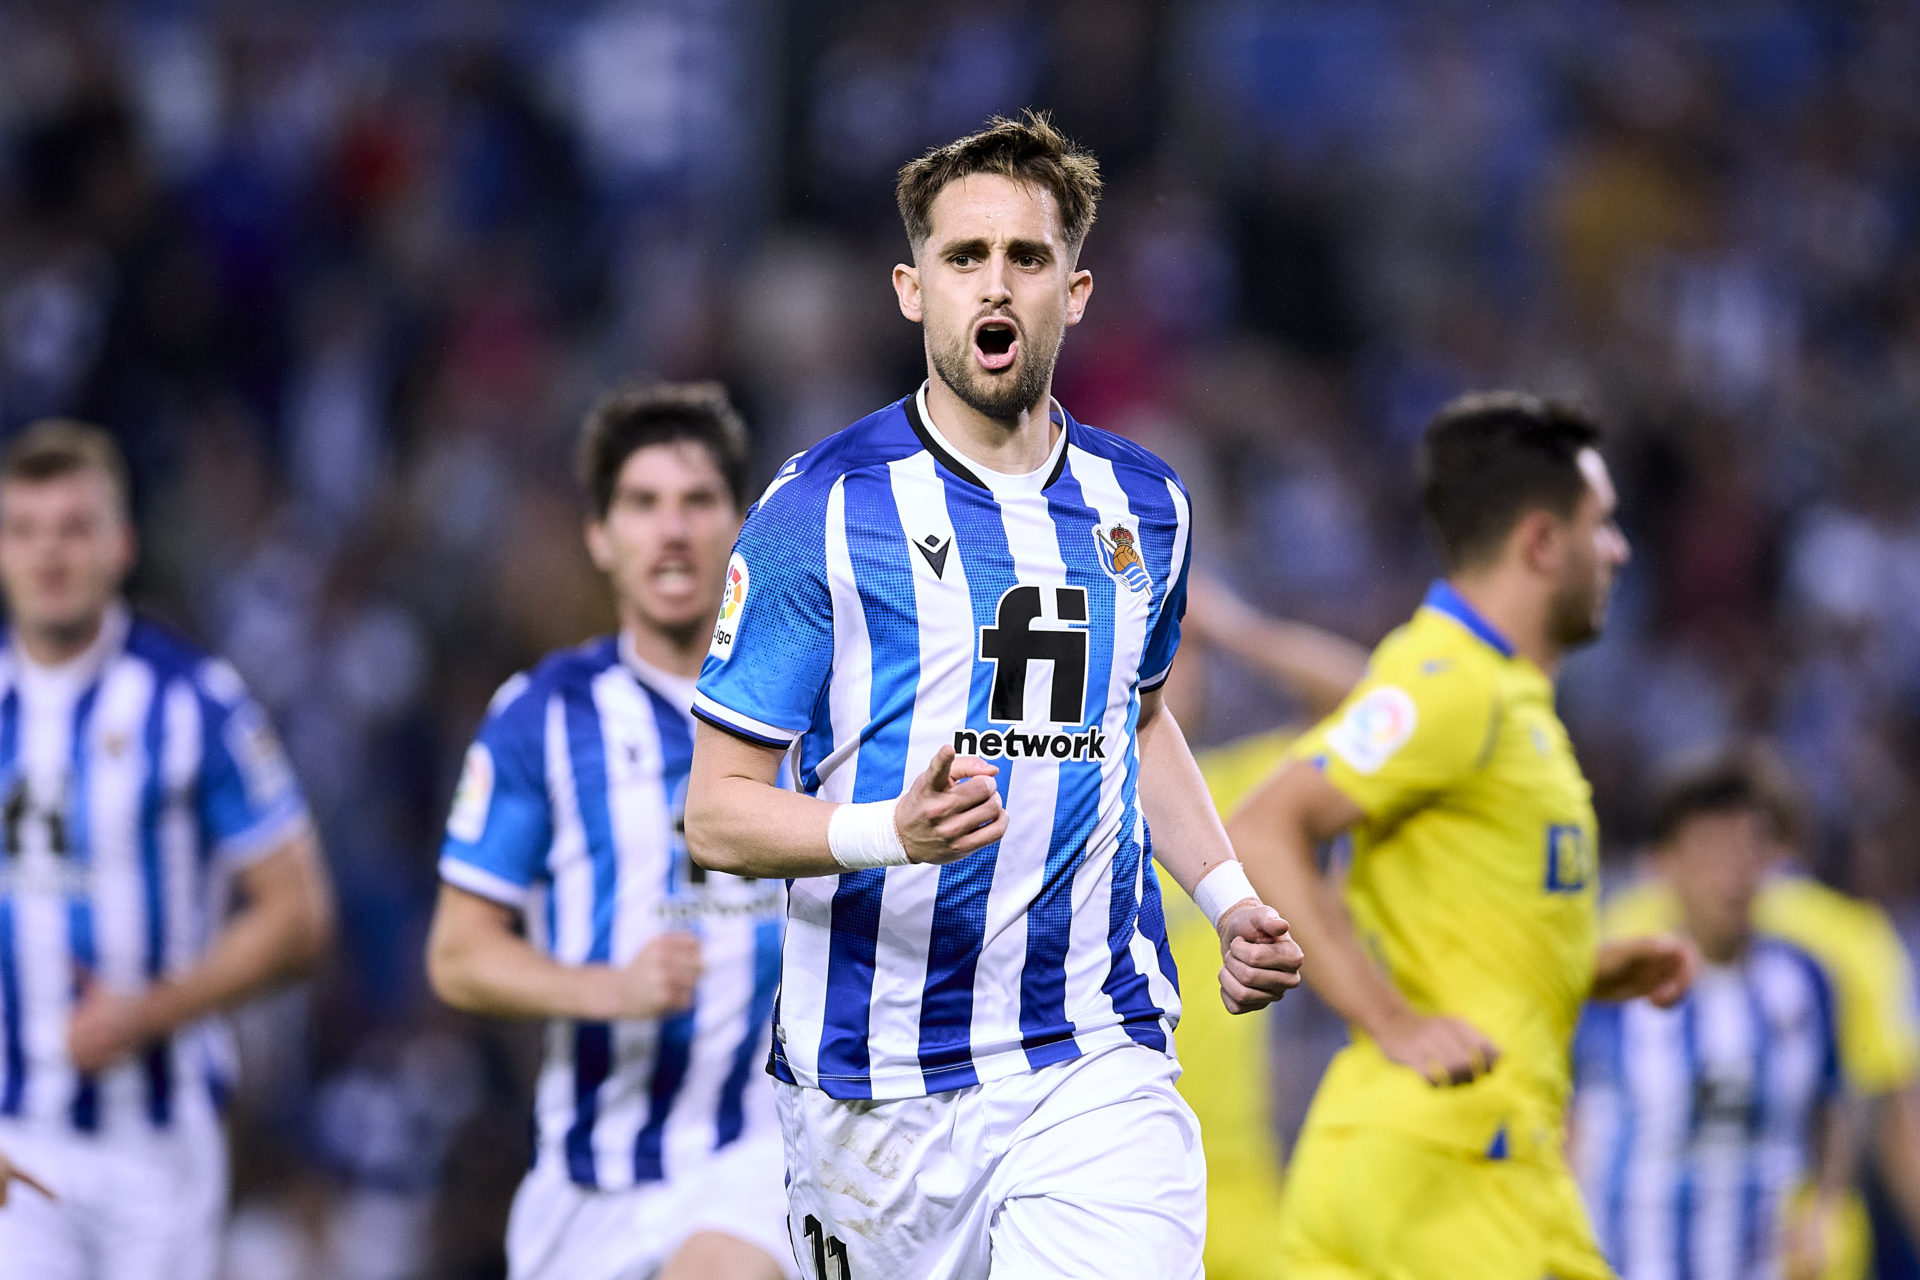 West Ham have reportedly made an offer to Adnan Januzaj